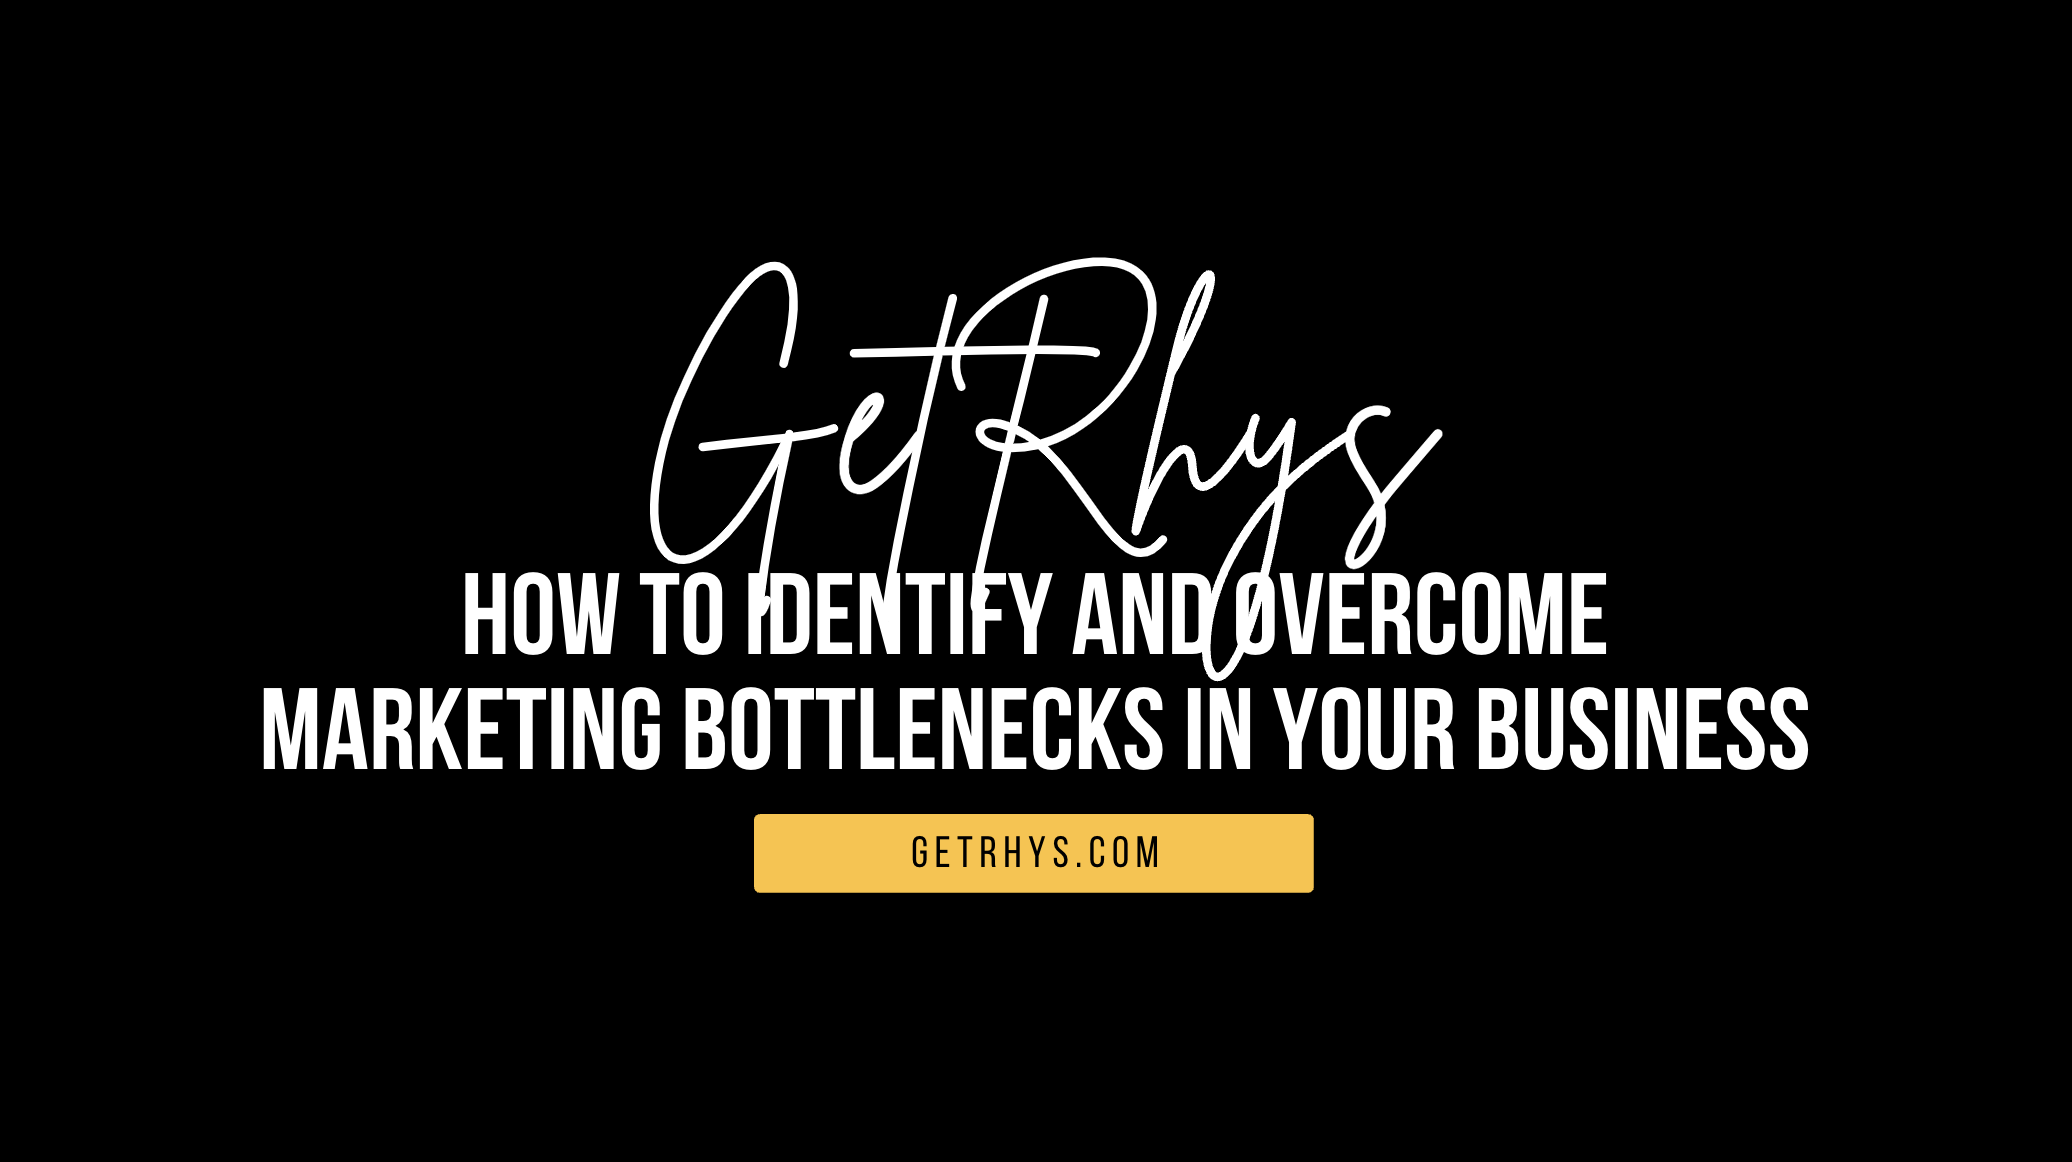 How to identify and overcome marketing bottlenecks in your business